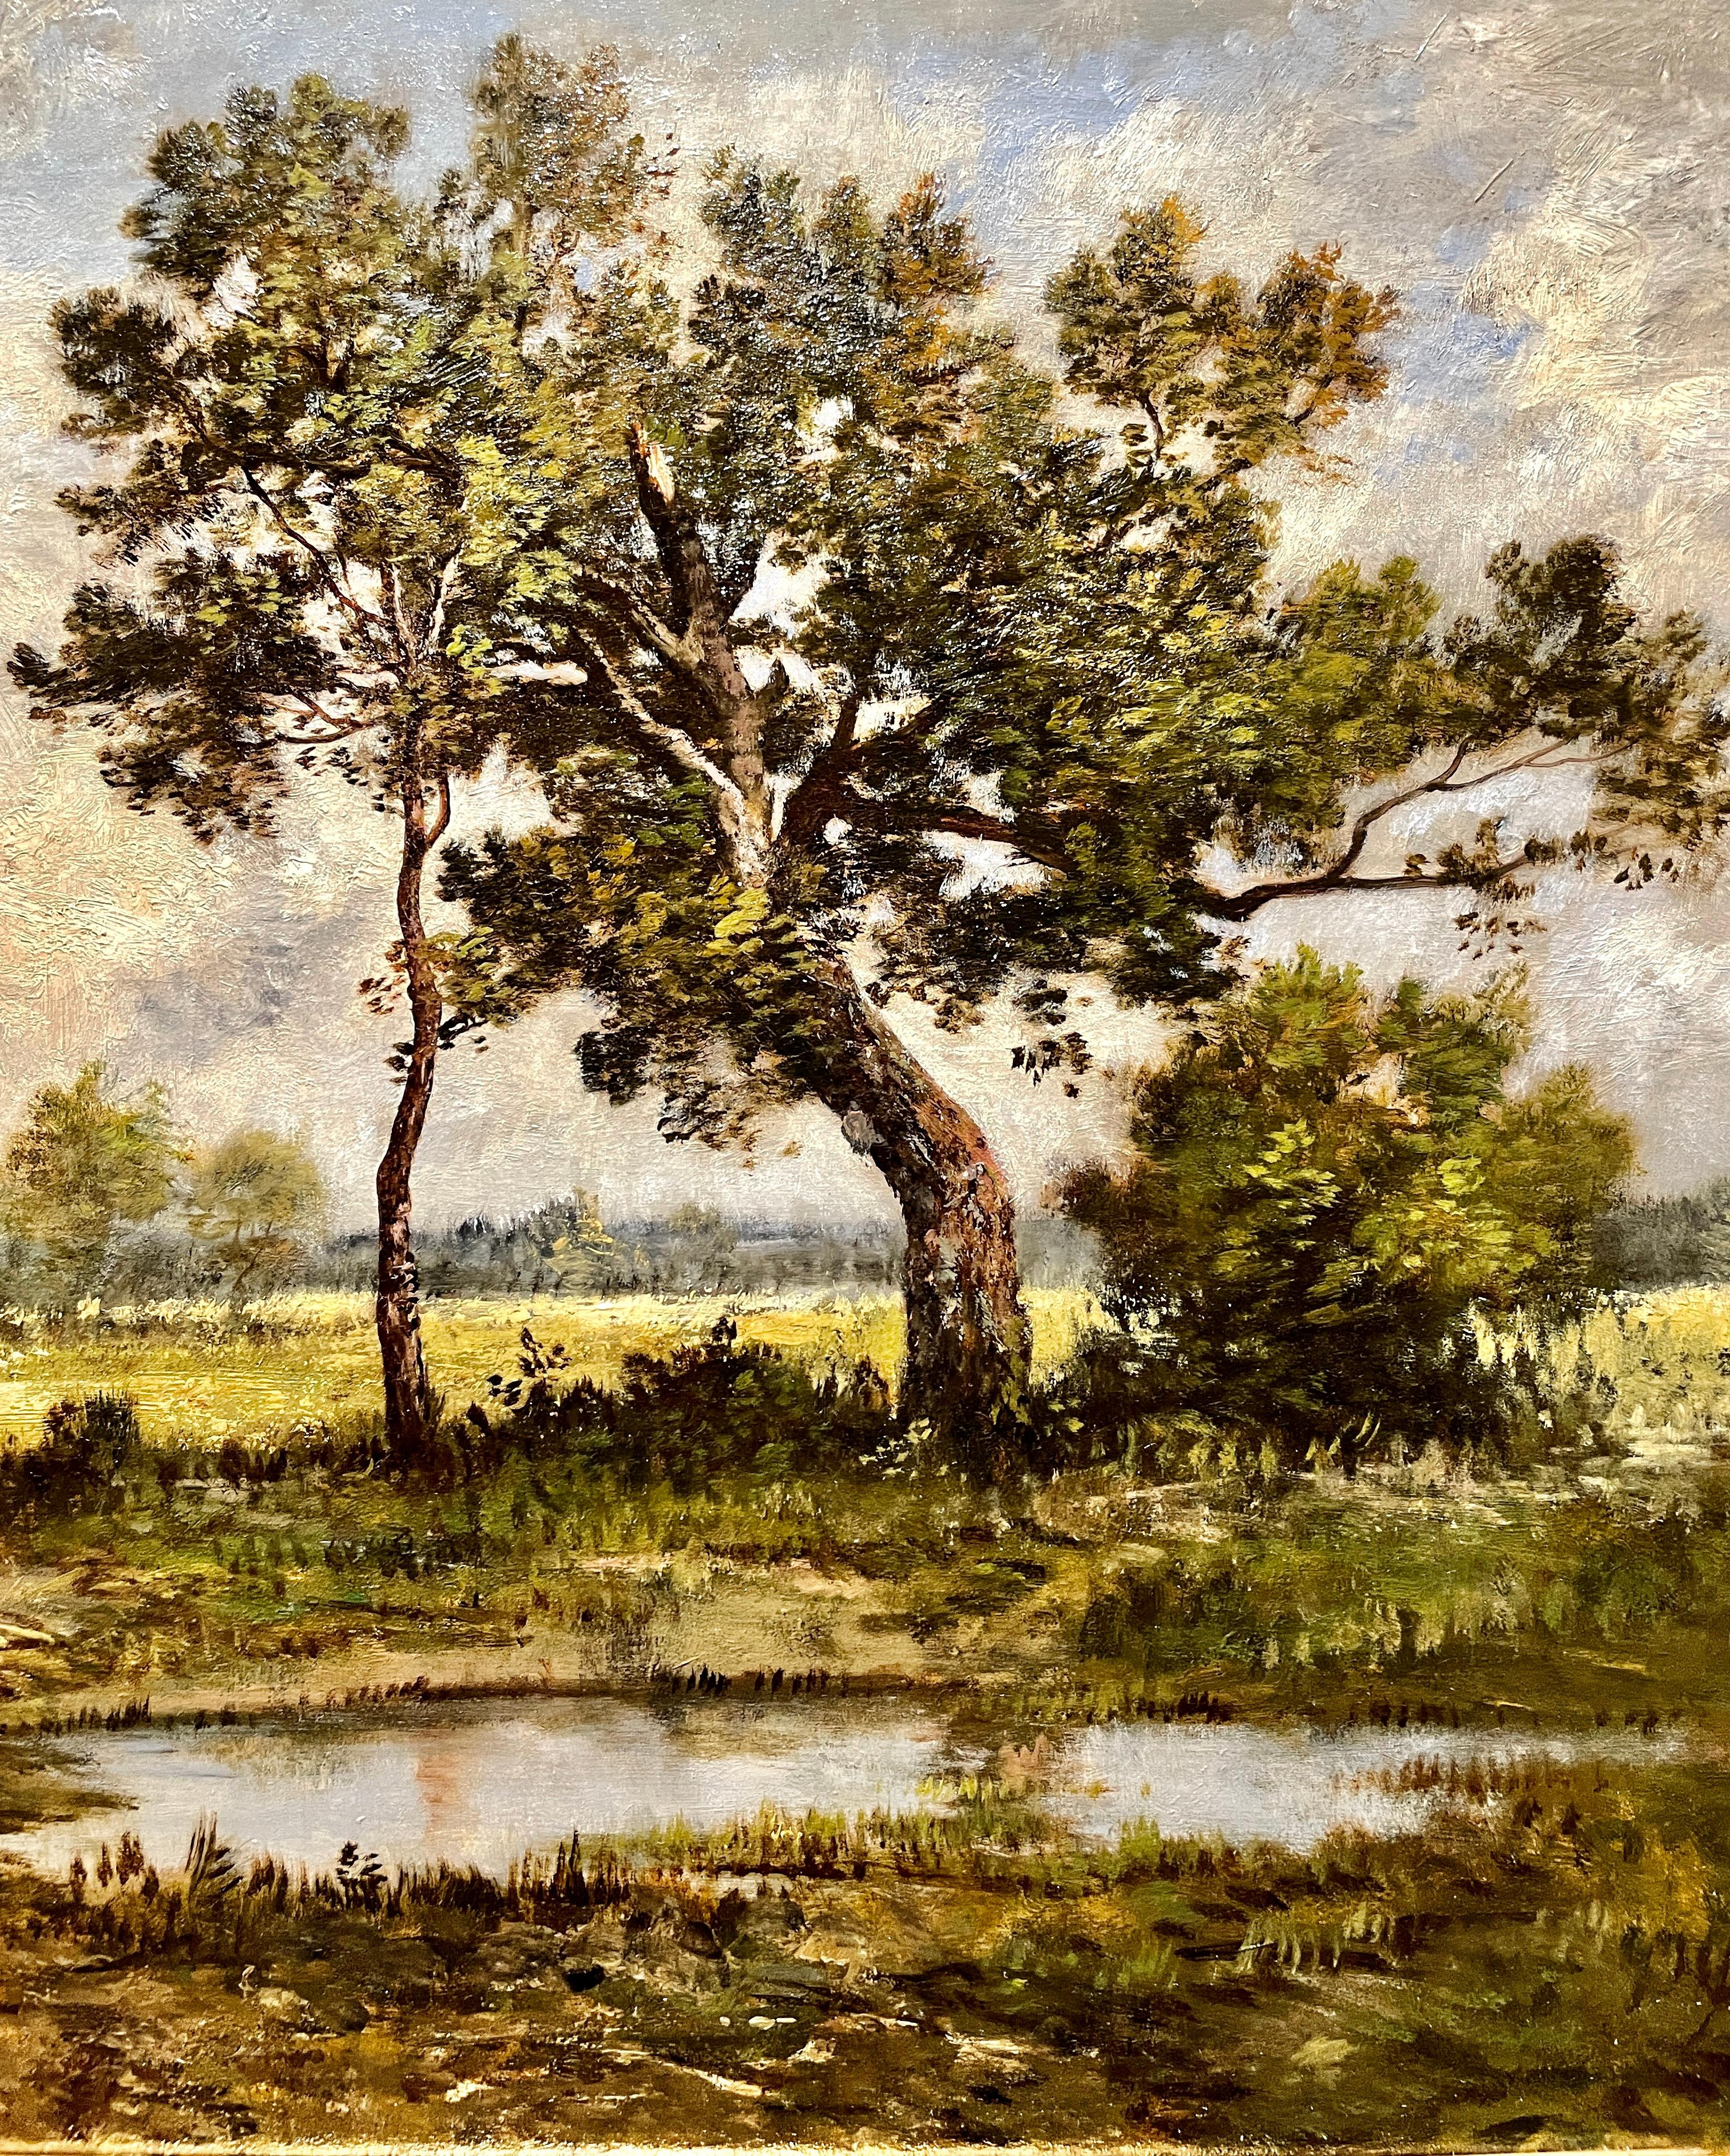 Antique French Barbizon School Oil on Canvas Painting by Léon Richet In Good Condition For Sale In New Orleans, LA